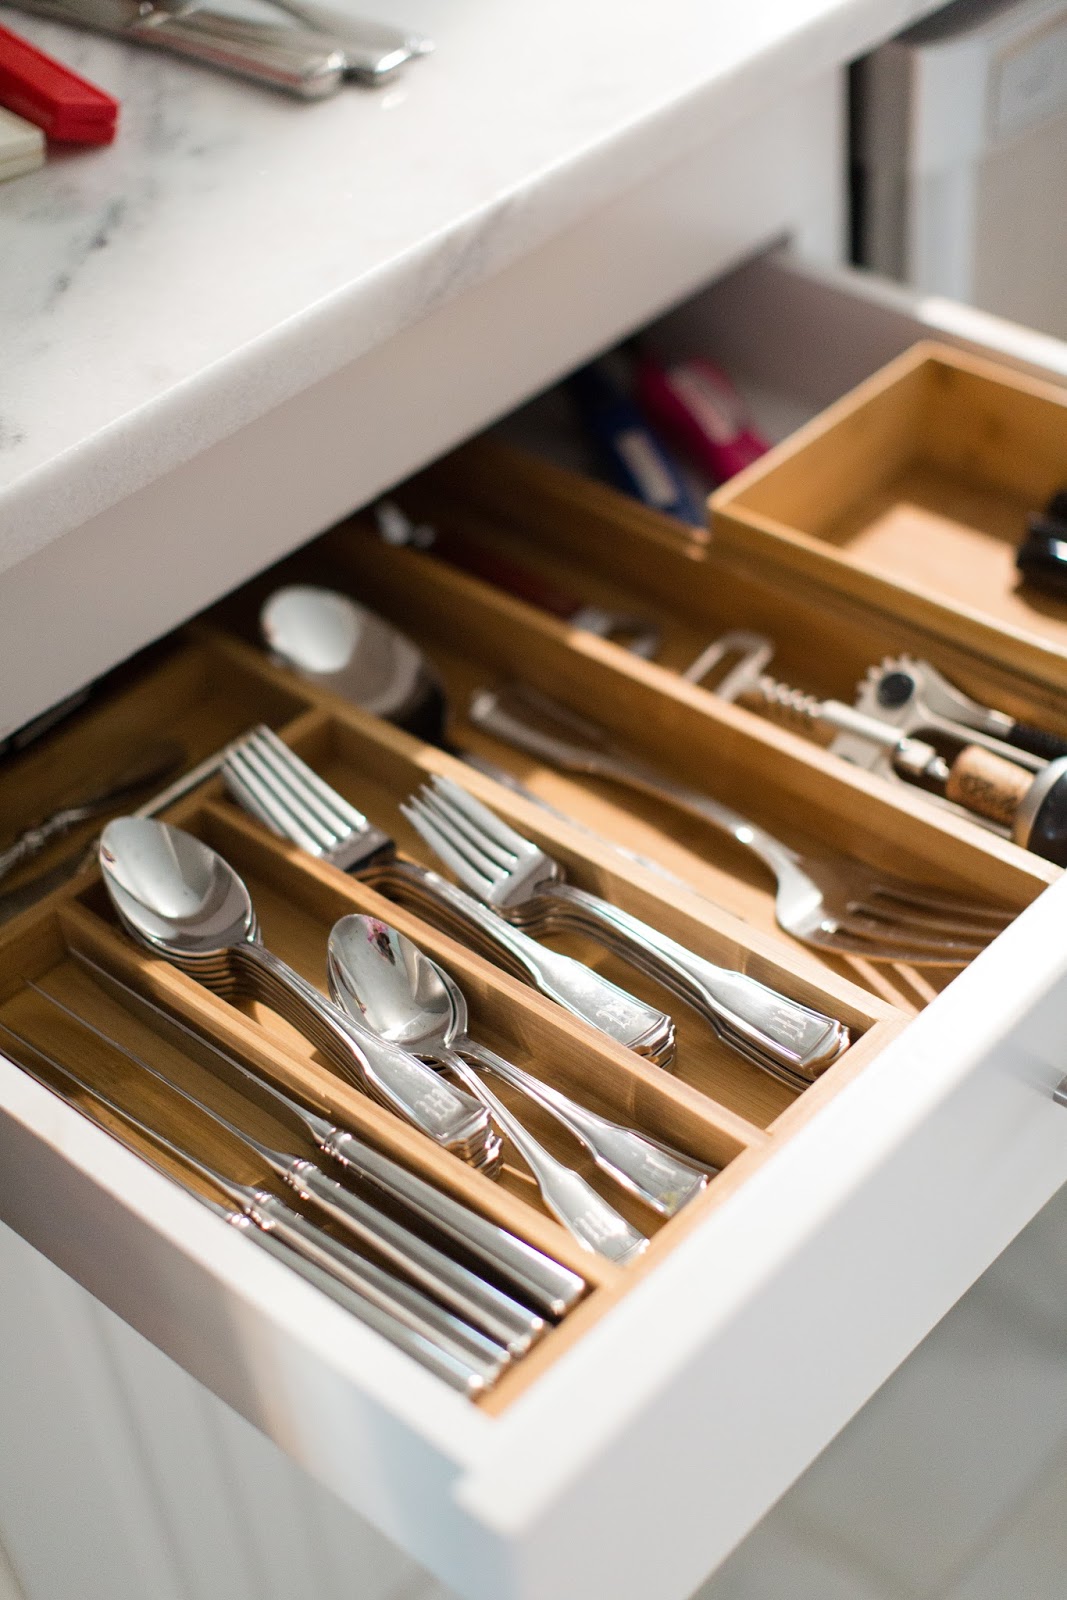 The Best of Amazon: Kitchen, Pantry and Home Organization